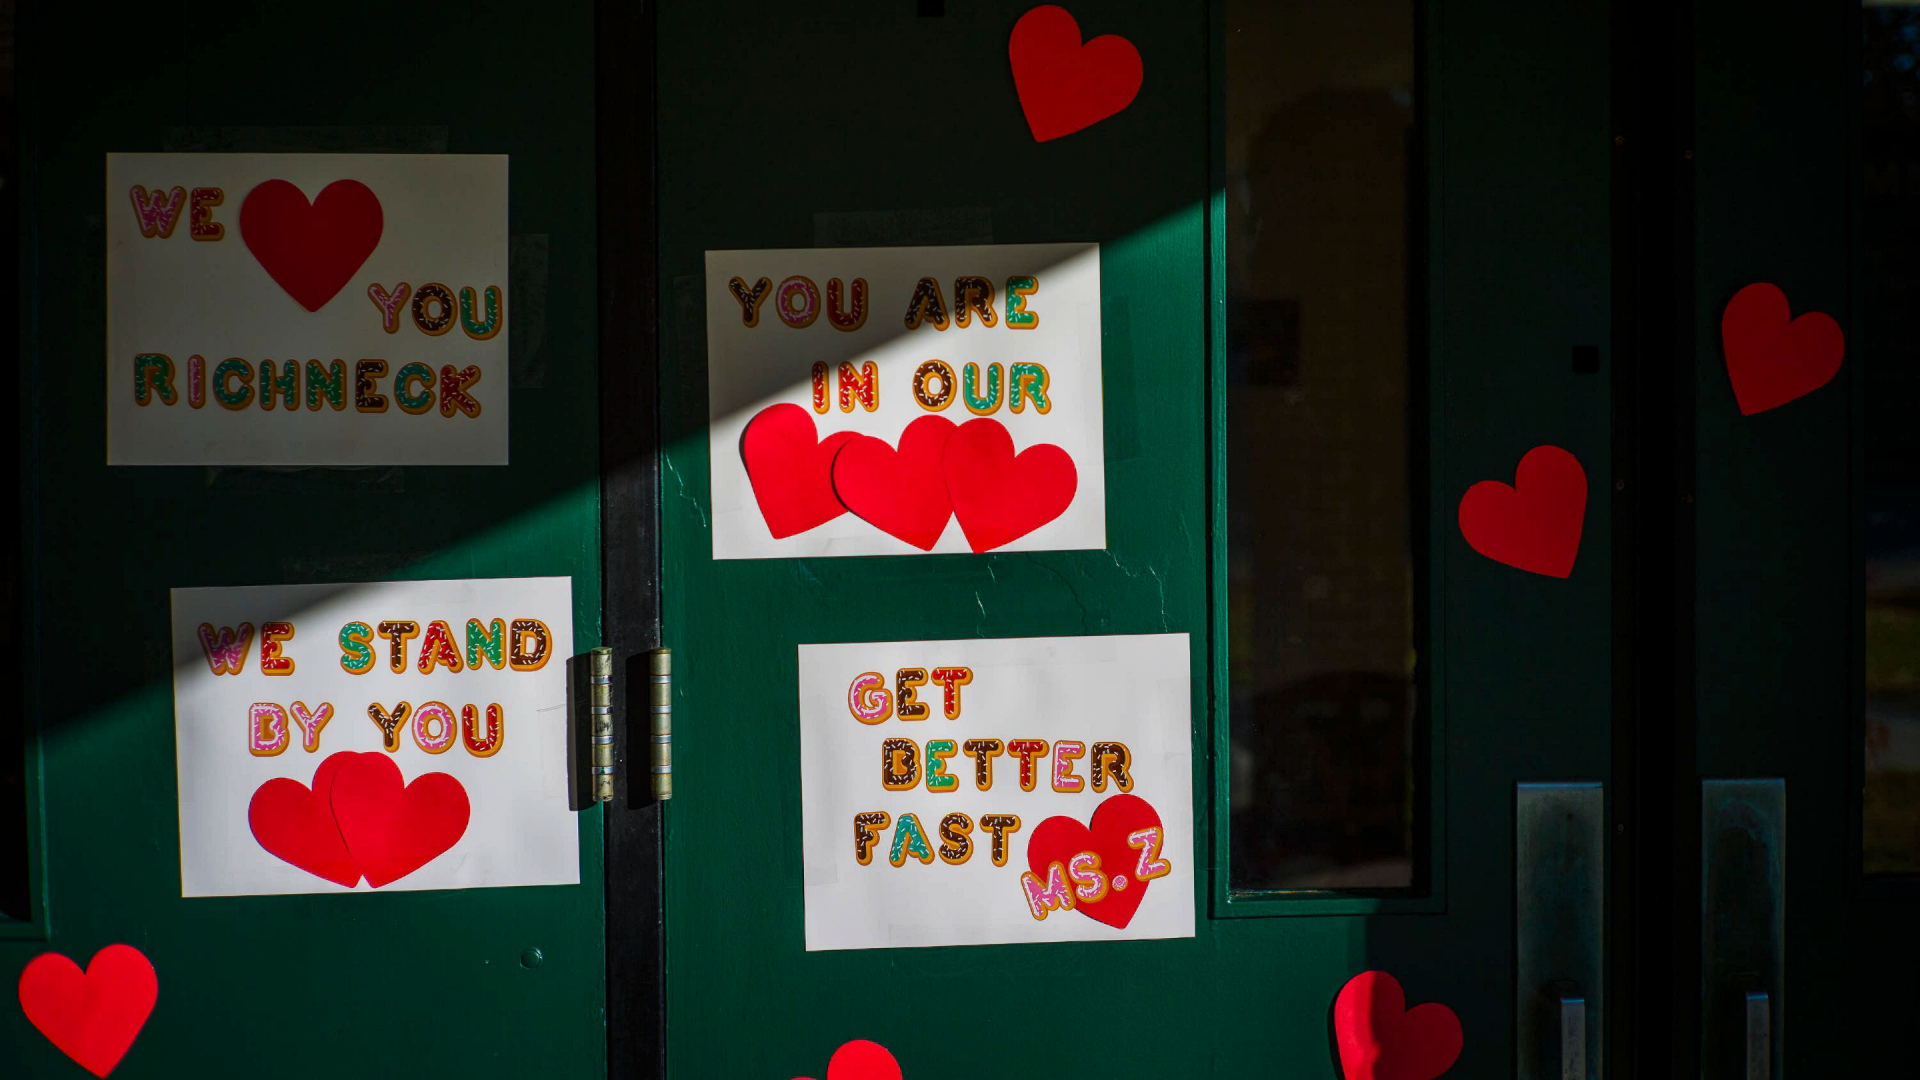 Messages of support for teacher Abby Zwerner gracing the front door of Richneck Elementary School.